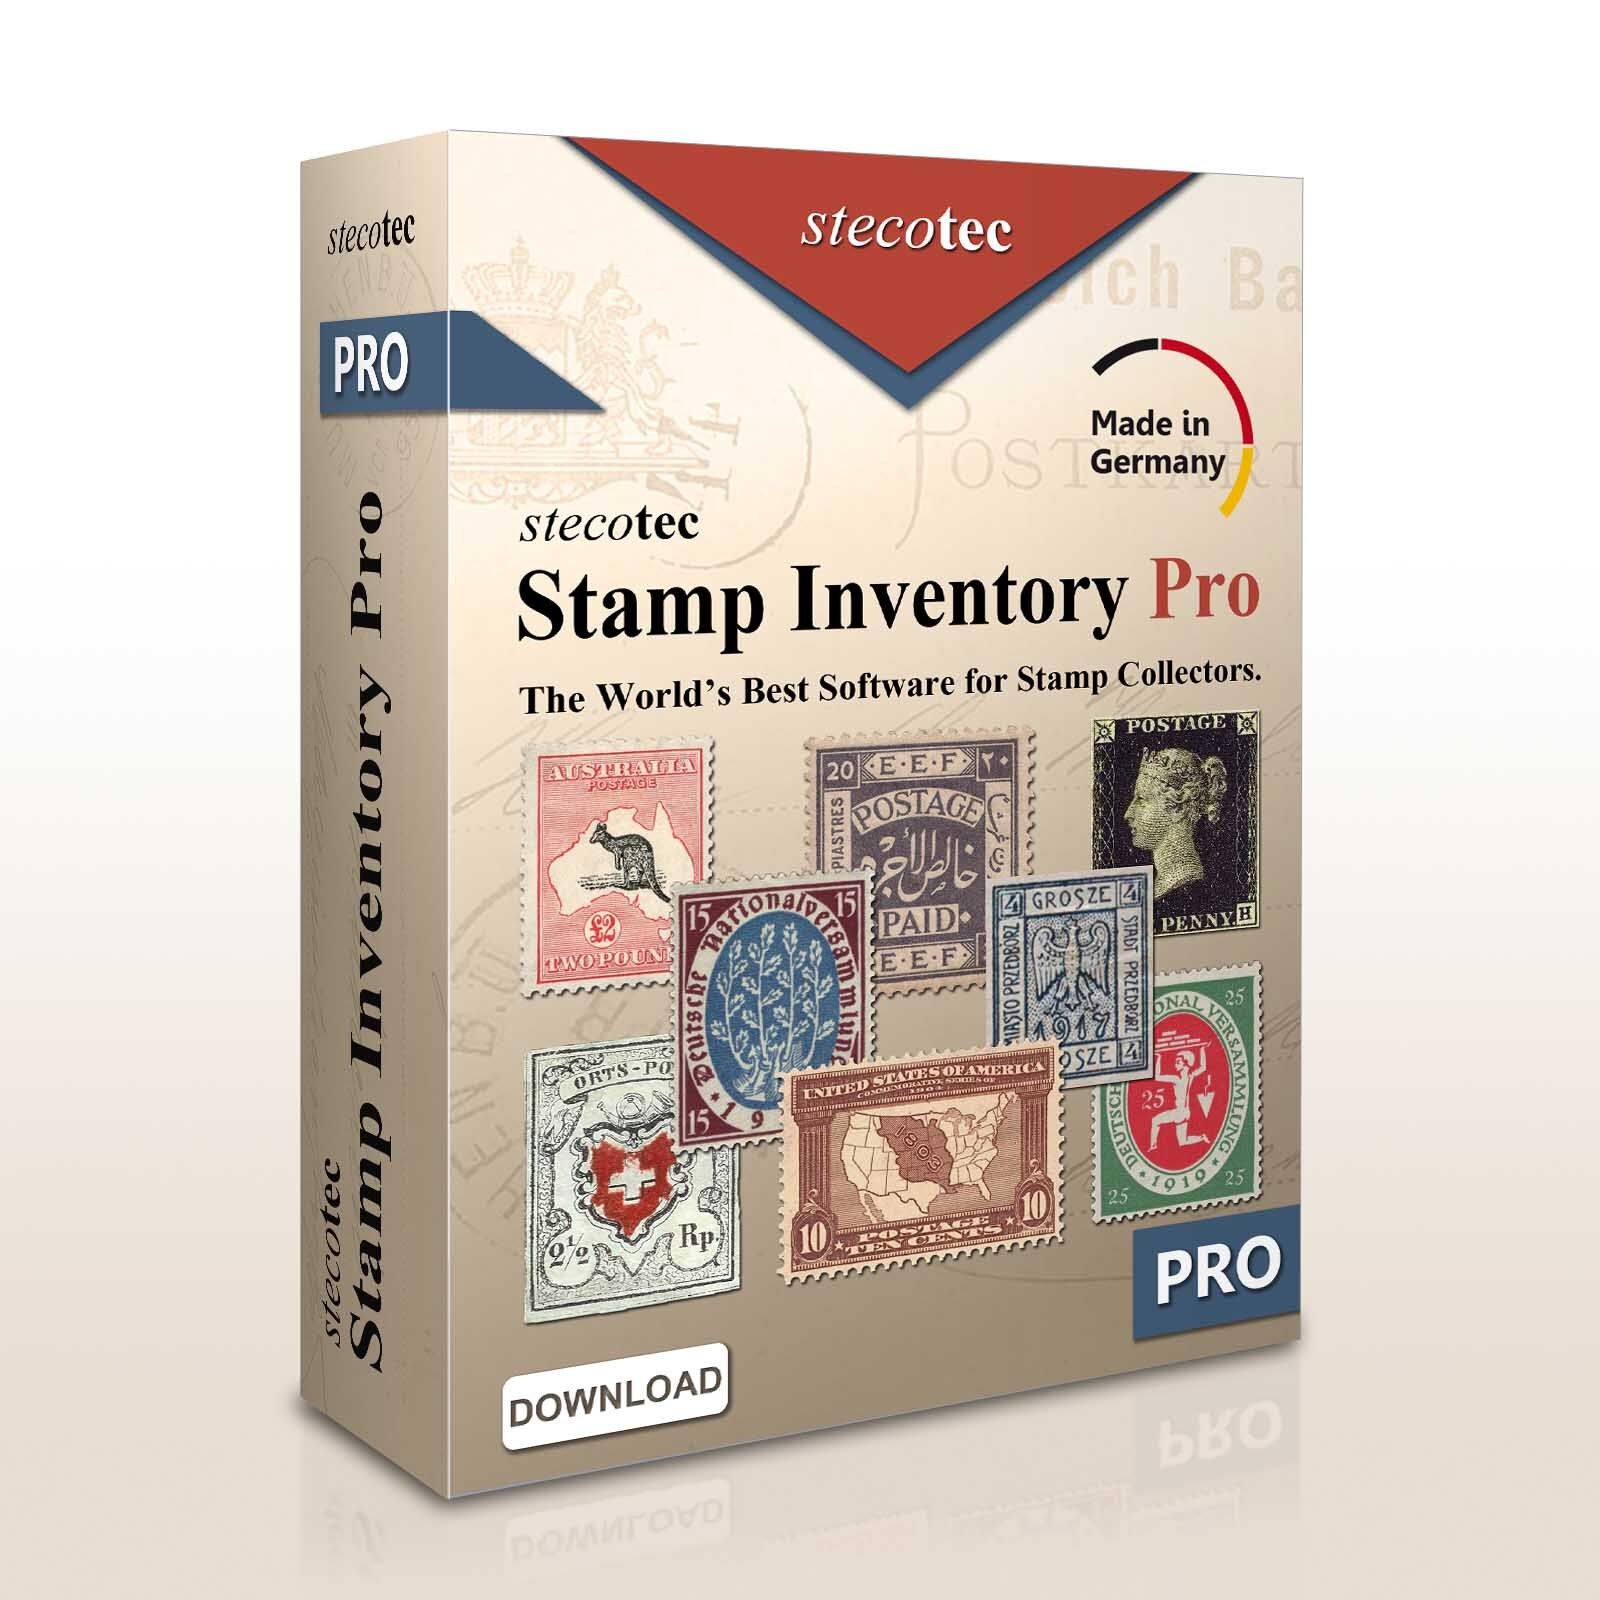 Stecotec Stamp Inventory Pro - The Collecting Software for Your Stamps - Program